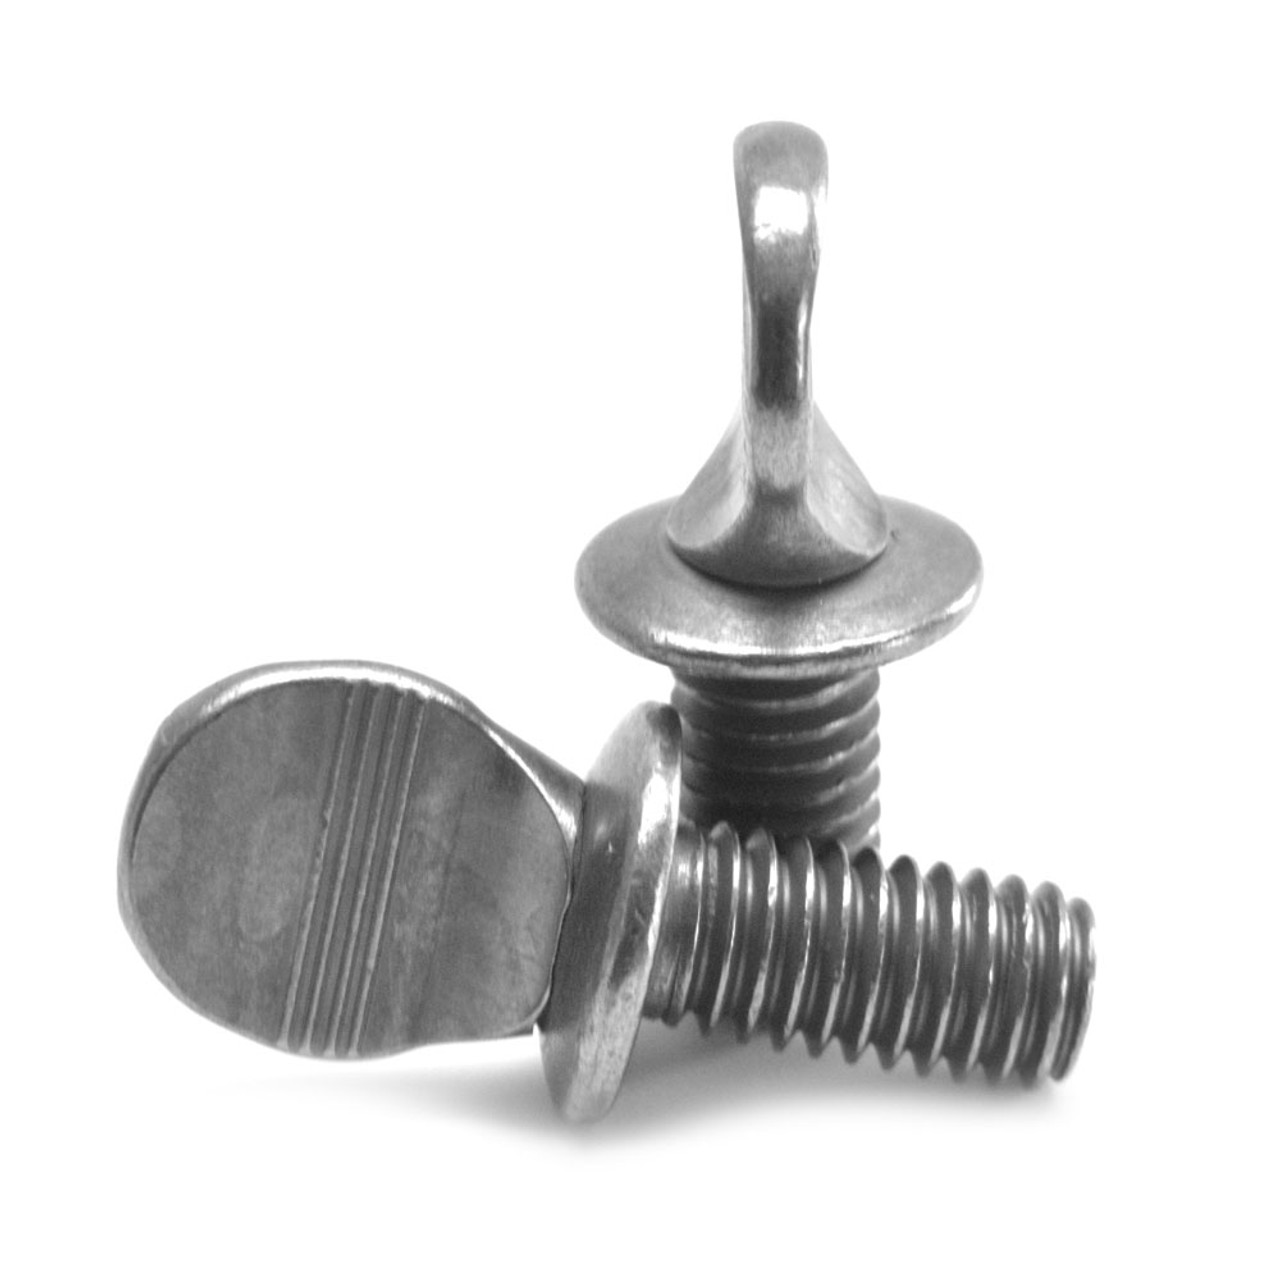 #10-24 x 3/4" (FT) Coarse Thread Thumb Screw Type A With Shoulder Low Carbon Steel Plain Finish